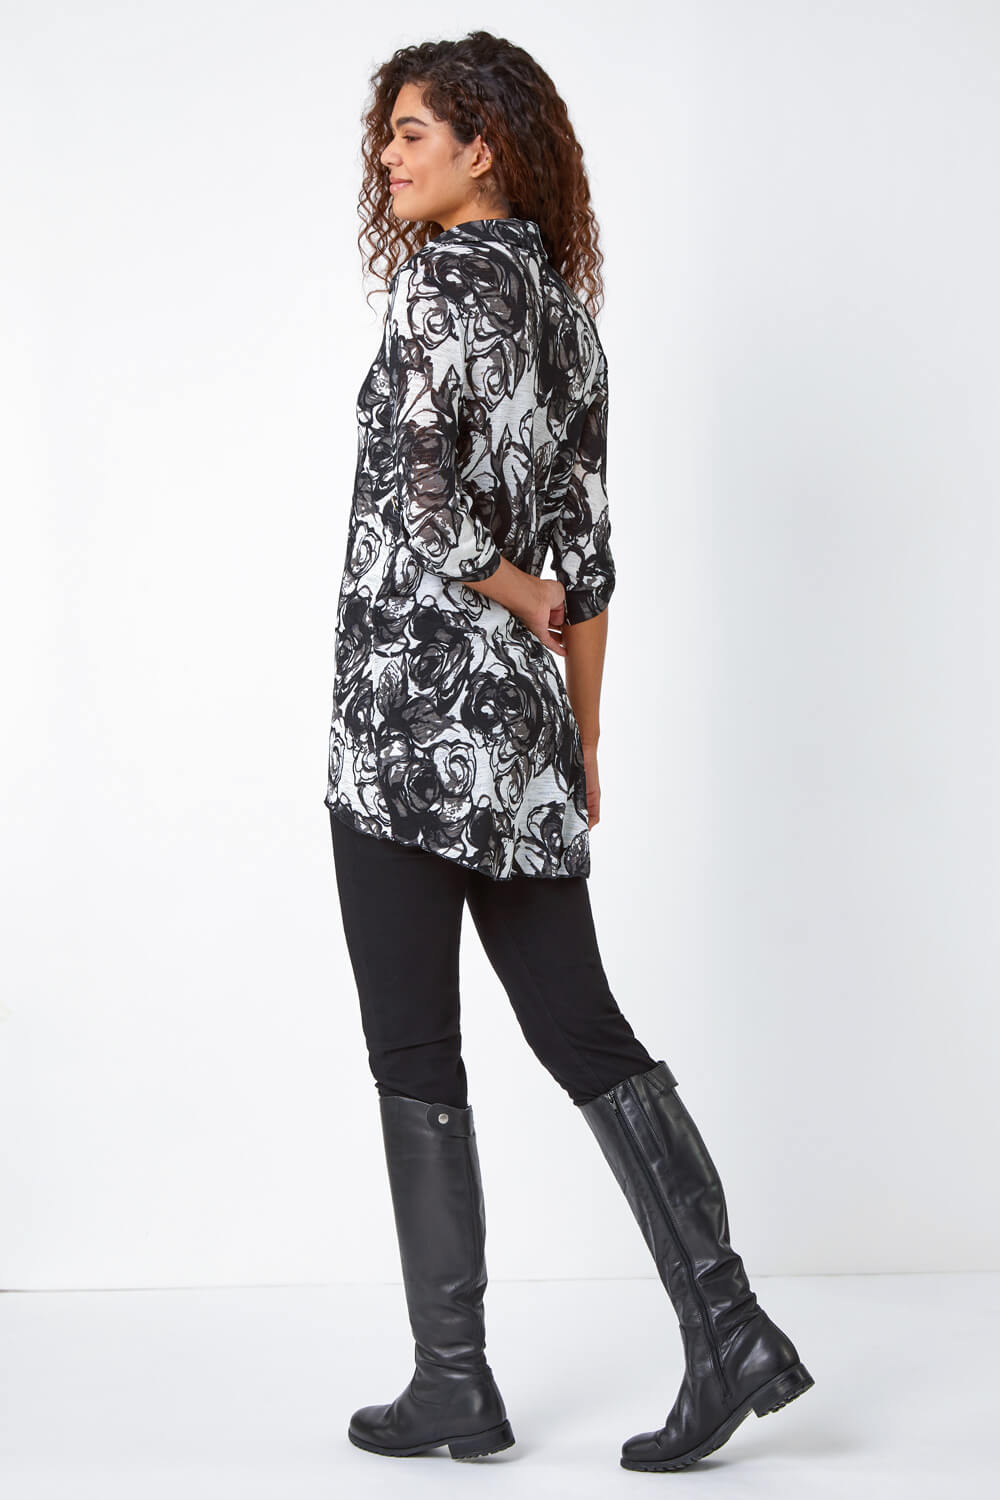 Black Floral Print Collared Stretch Top, Image 3 of 5